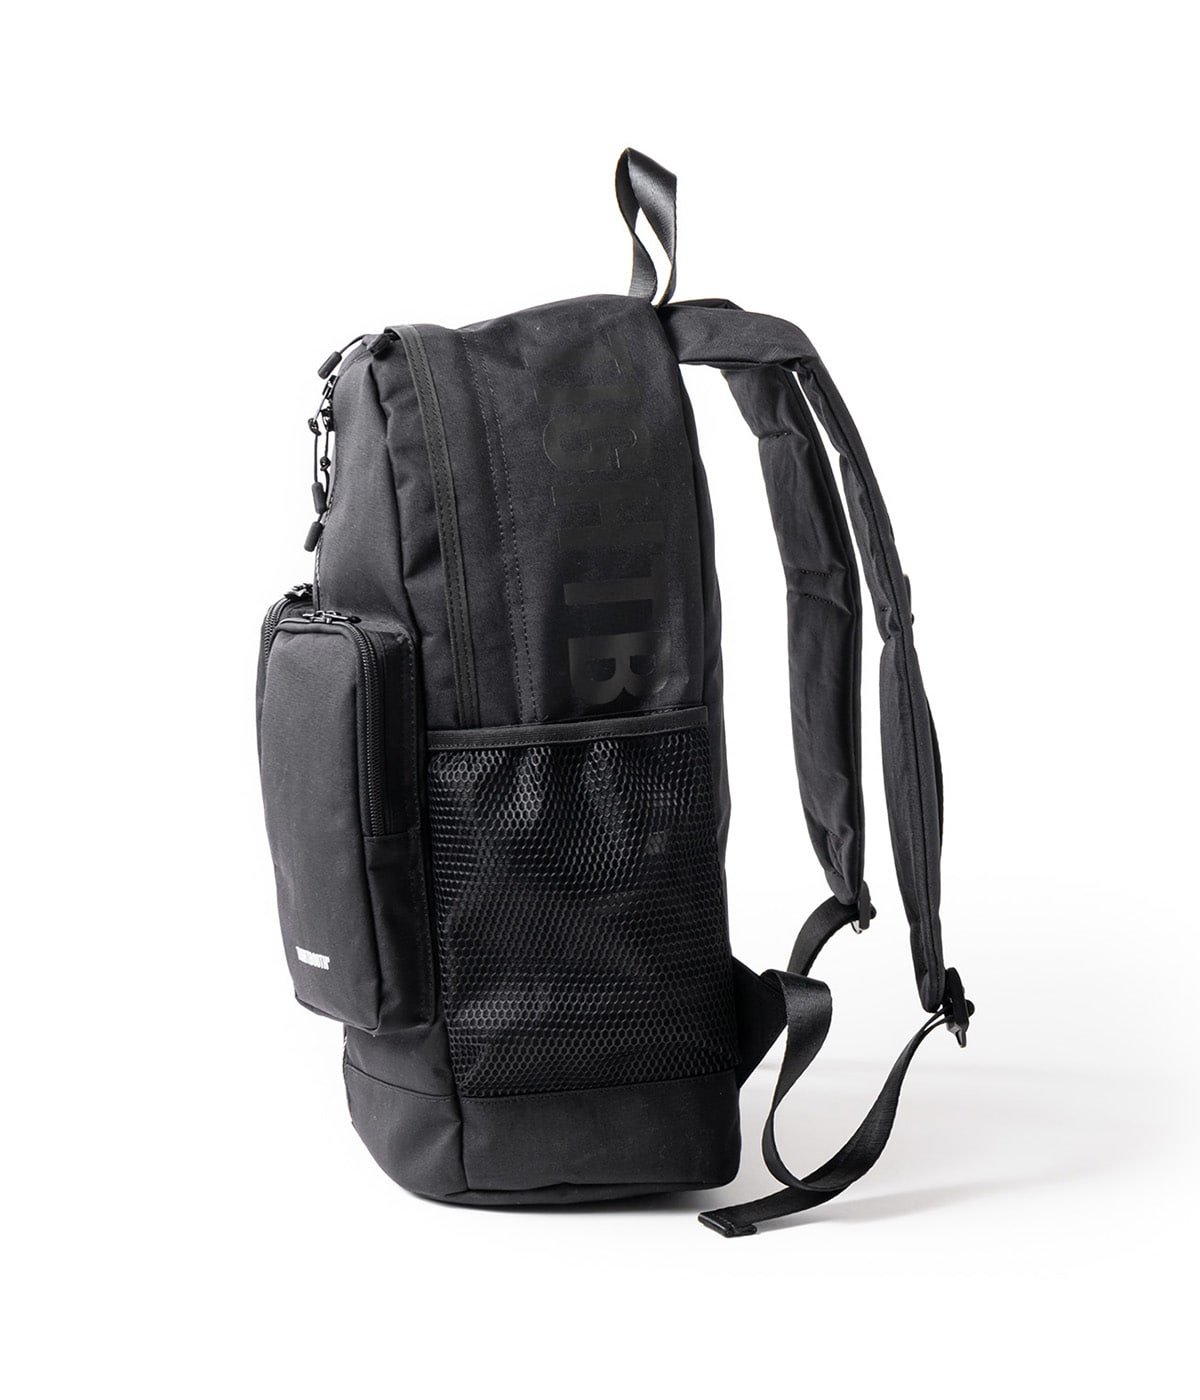 tightbooth DOUBLE POCKET BACKPACK バッグ リュック/バックパック ...